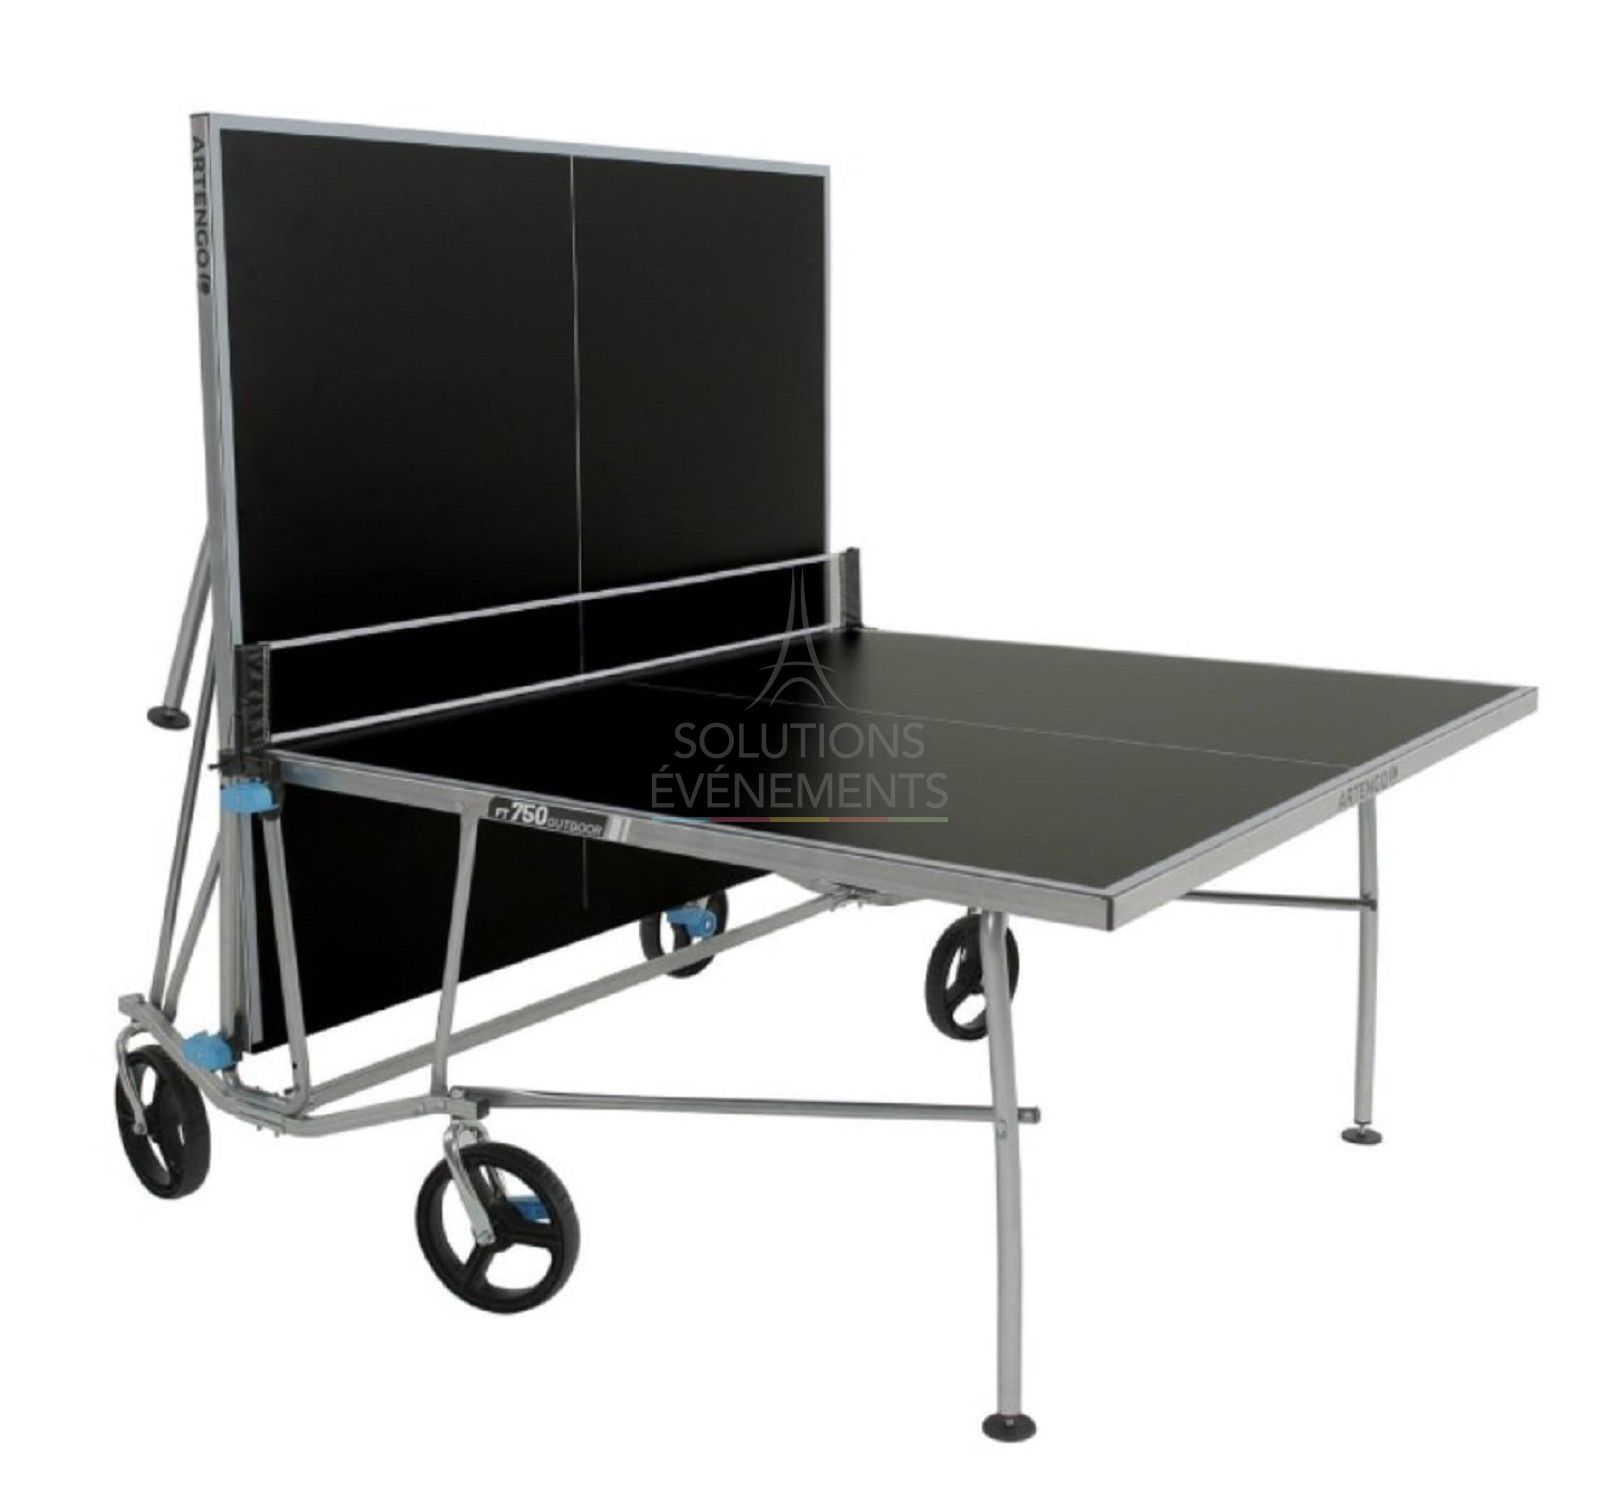 Location table de ping pong